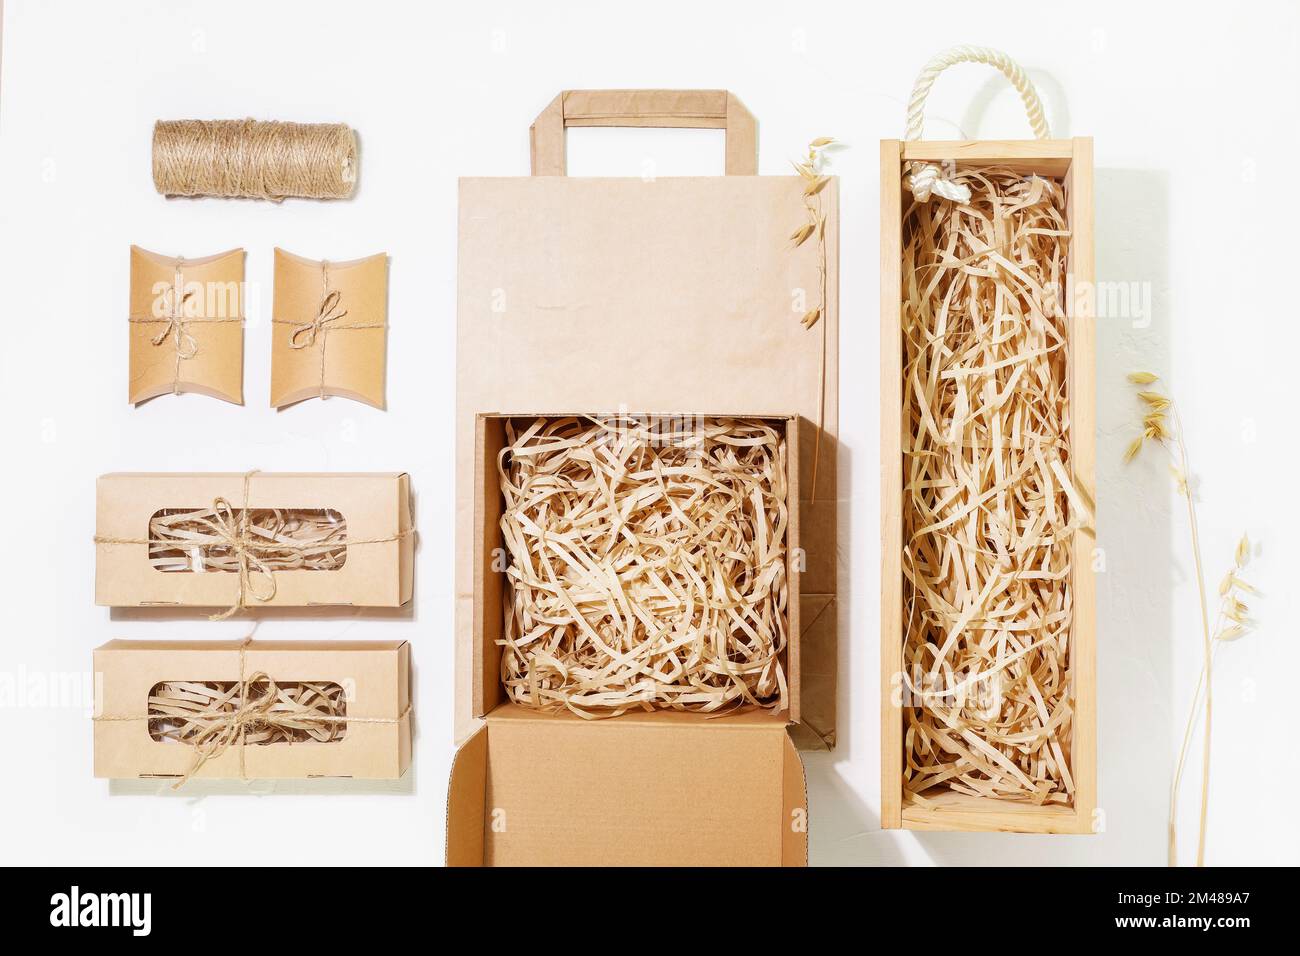 Eco friendly packaging concept. Set of cardboard boxes with shredded paper inside, paper bag and small gift boxes for packaging goods from online stor Stock Photo